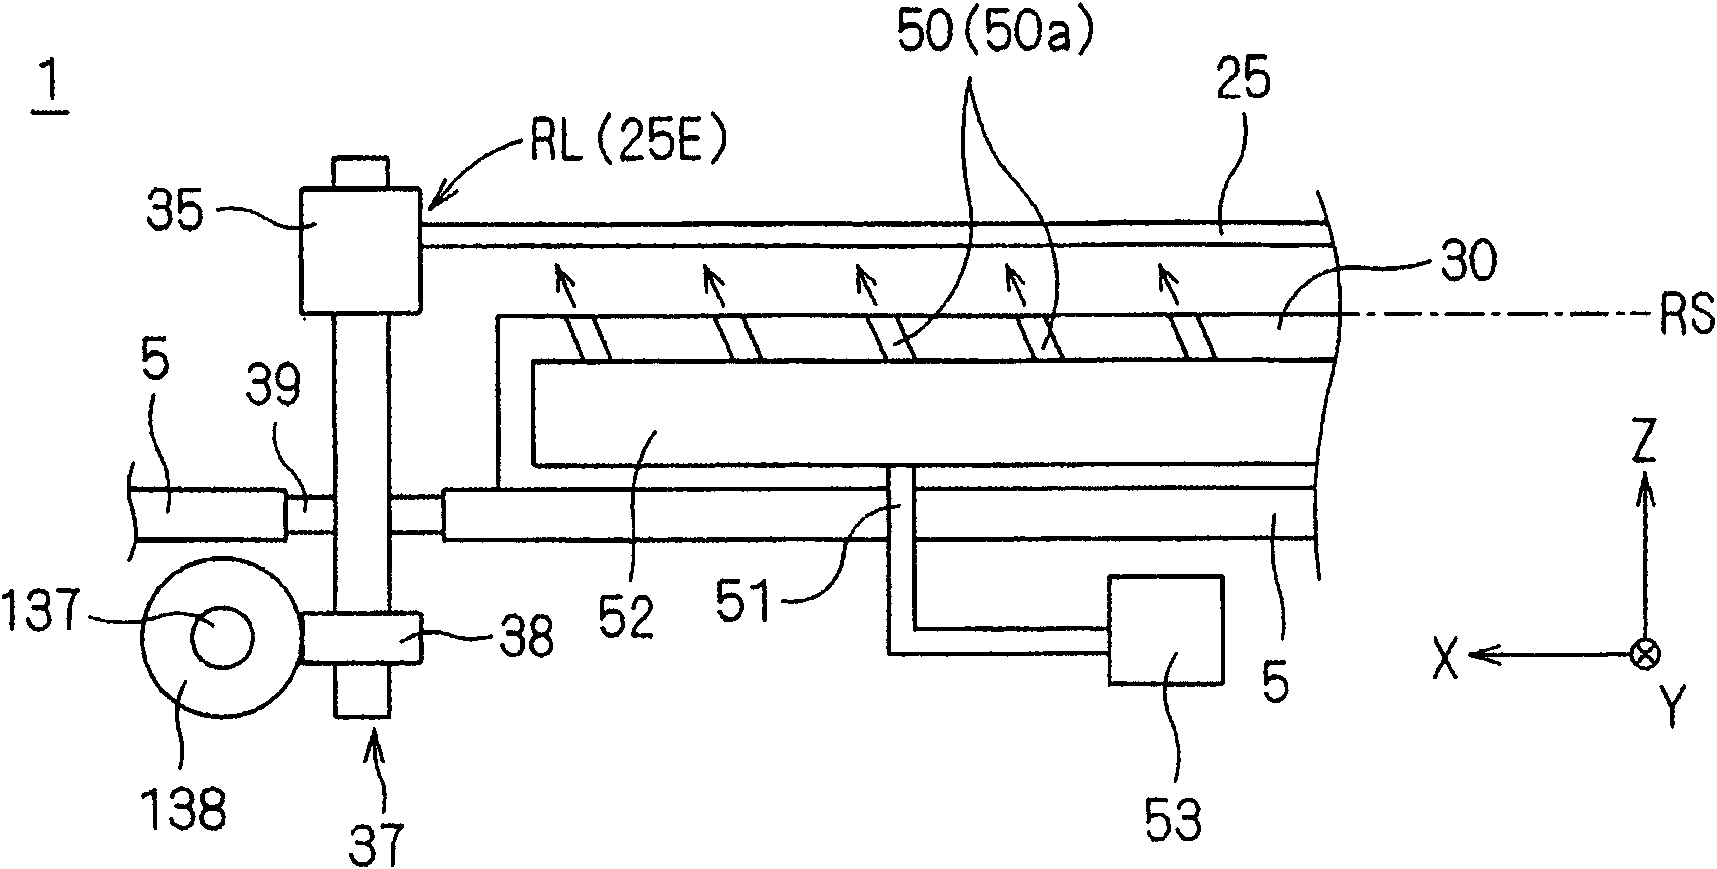 Apparatus for conveying substrates, method and apparatus for locating substrates